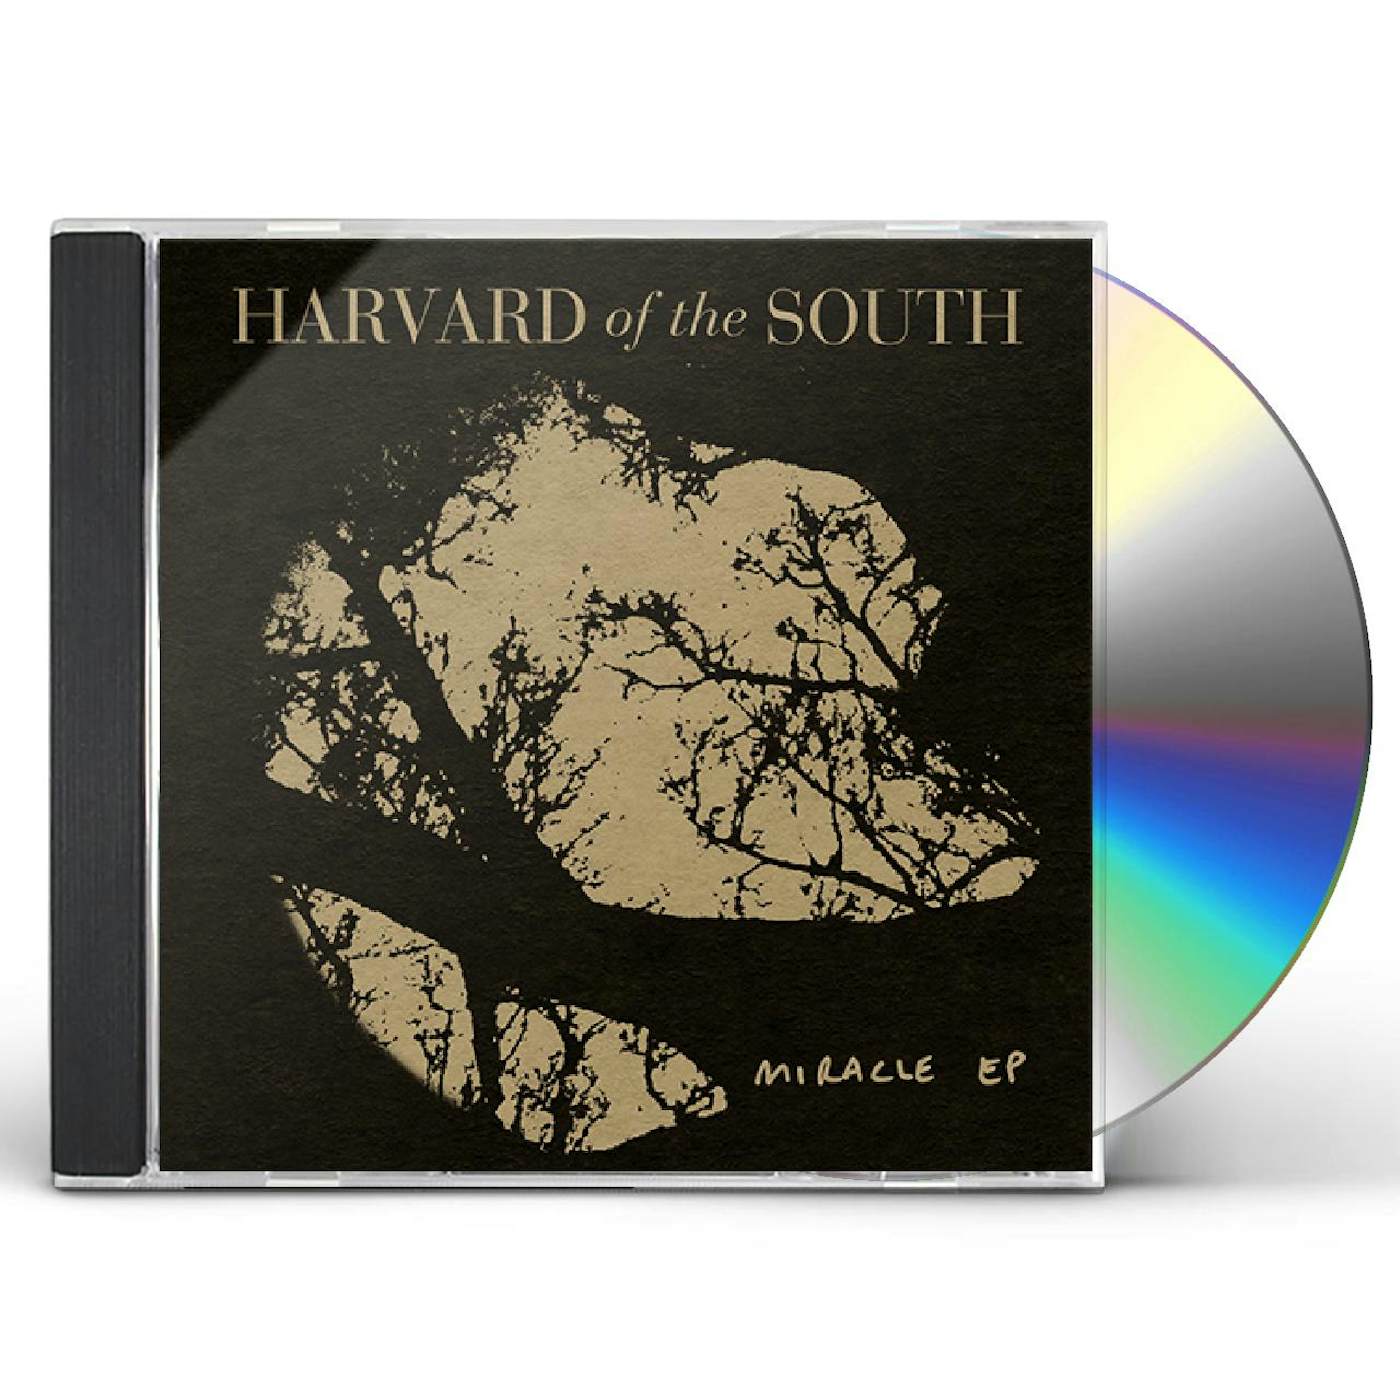 Harvard of the South - Miracle EP CD